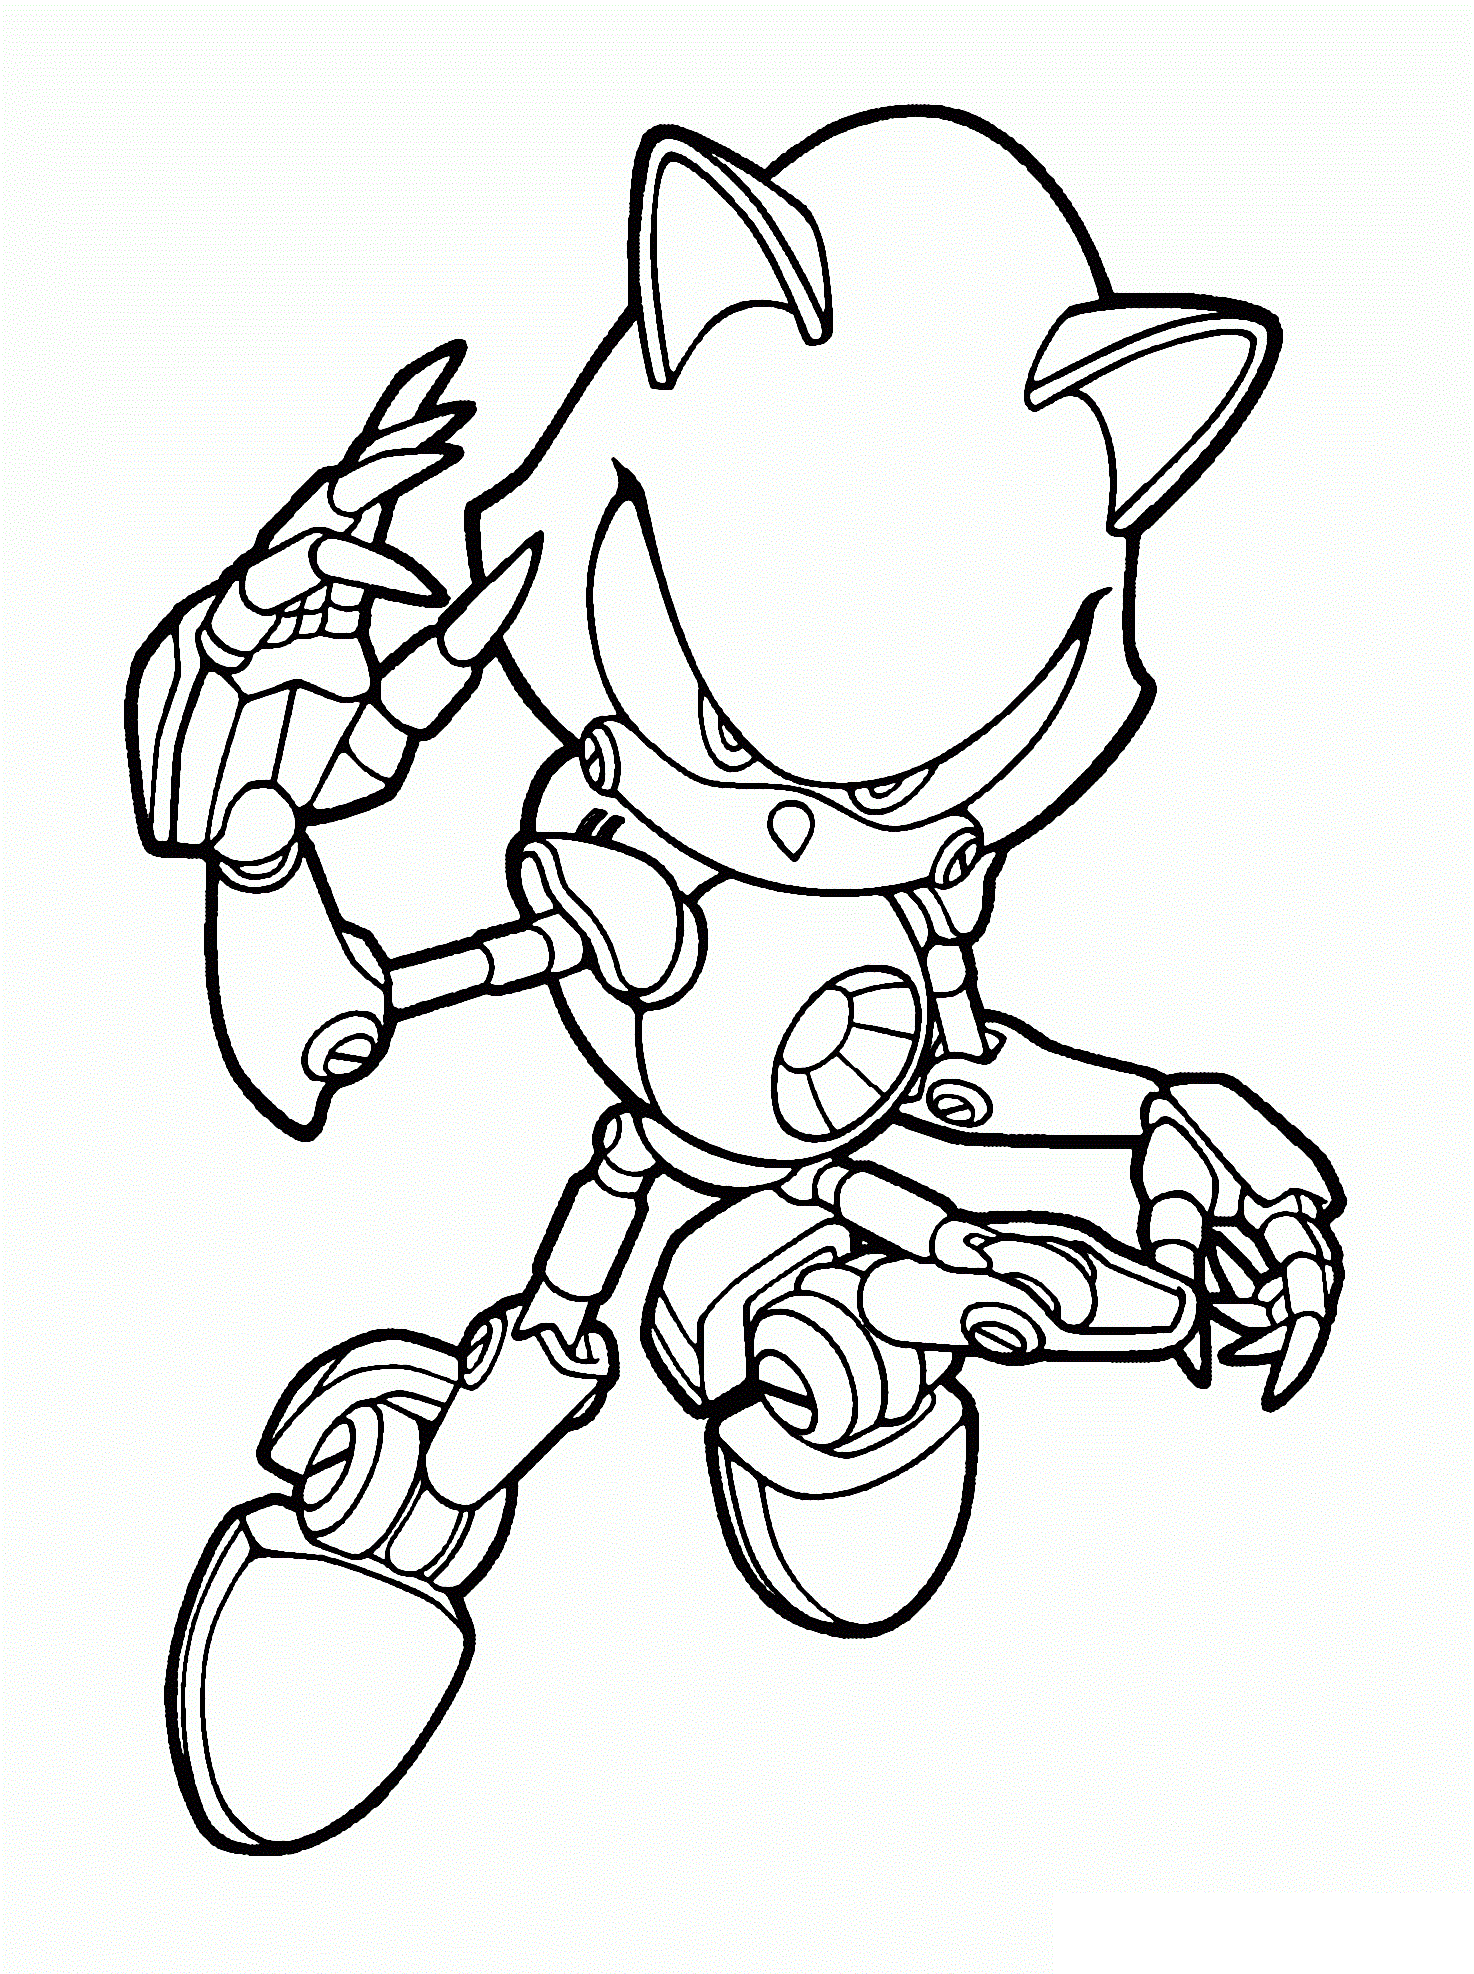 Metal Sonic Coloring Page - Free Printable Coloring Pages for Kids